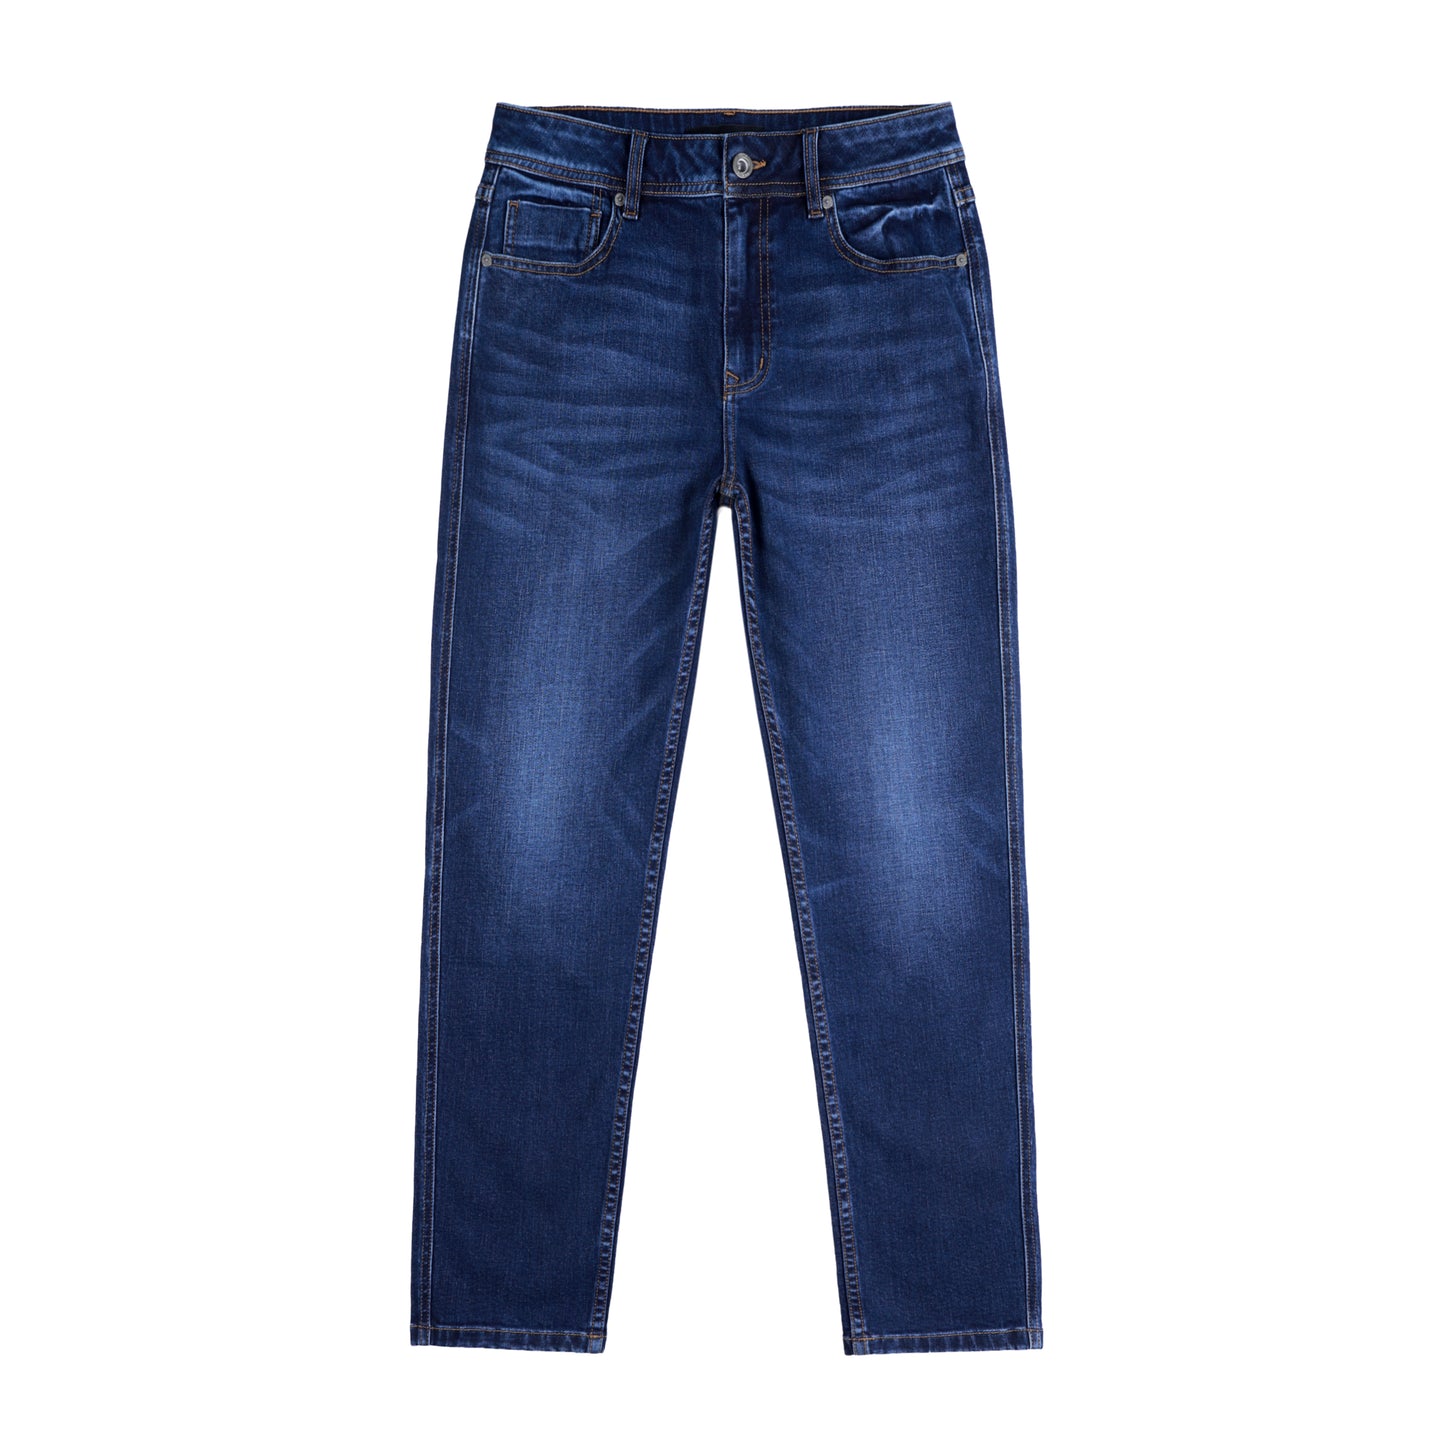 PRTH Men relaxed straight jean